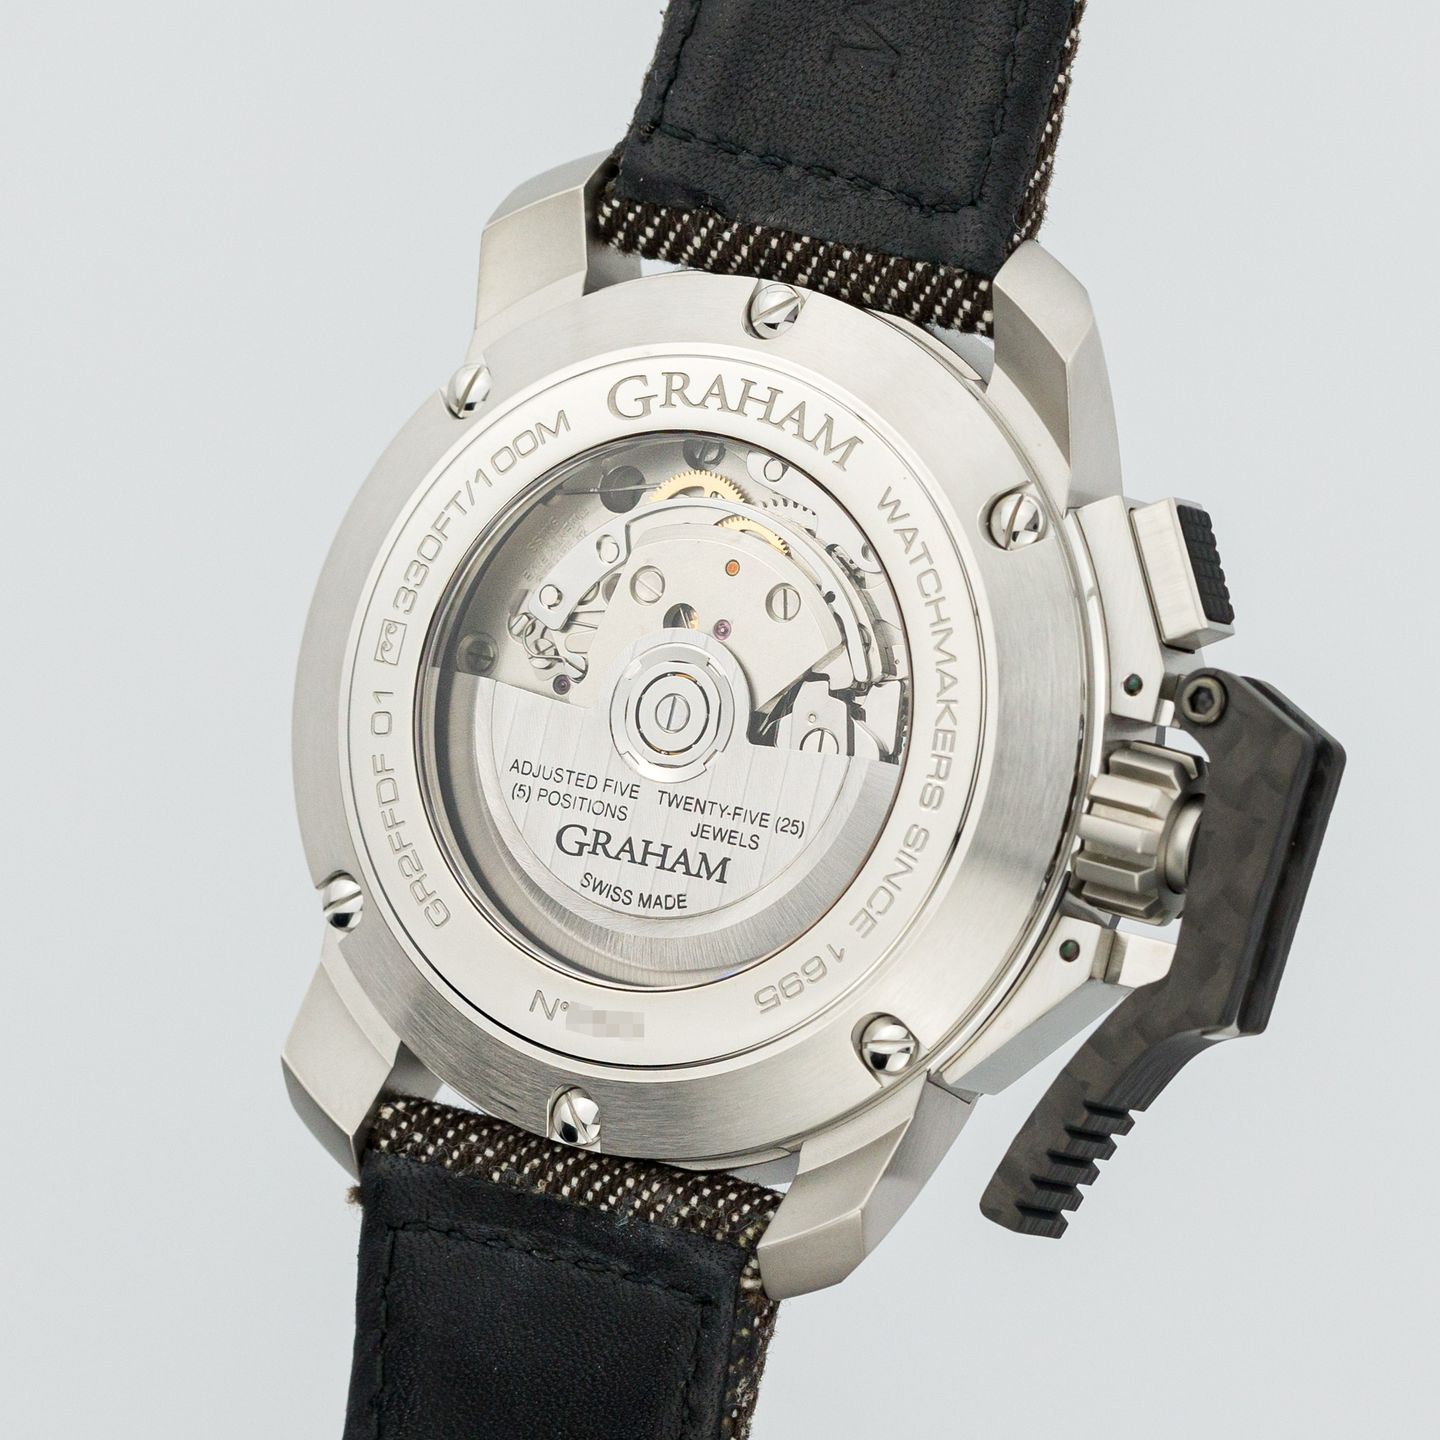 Graham Chronofighter Oversize 2CCAC.B16A (Unknown (random serial)) - Transparent dial 47 mm Steel case (2/7)